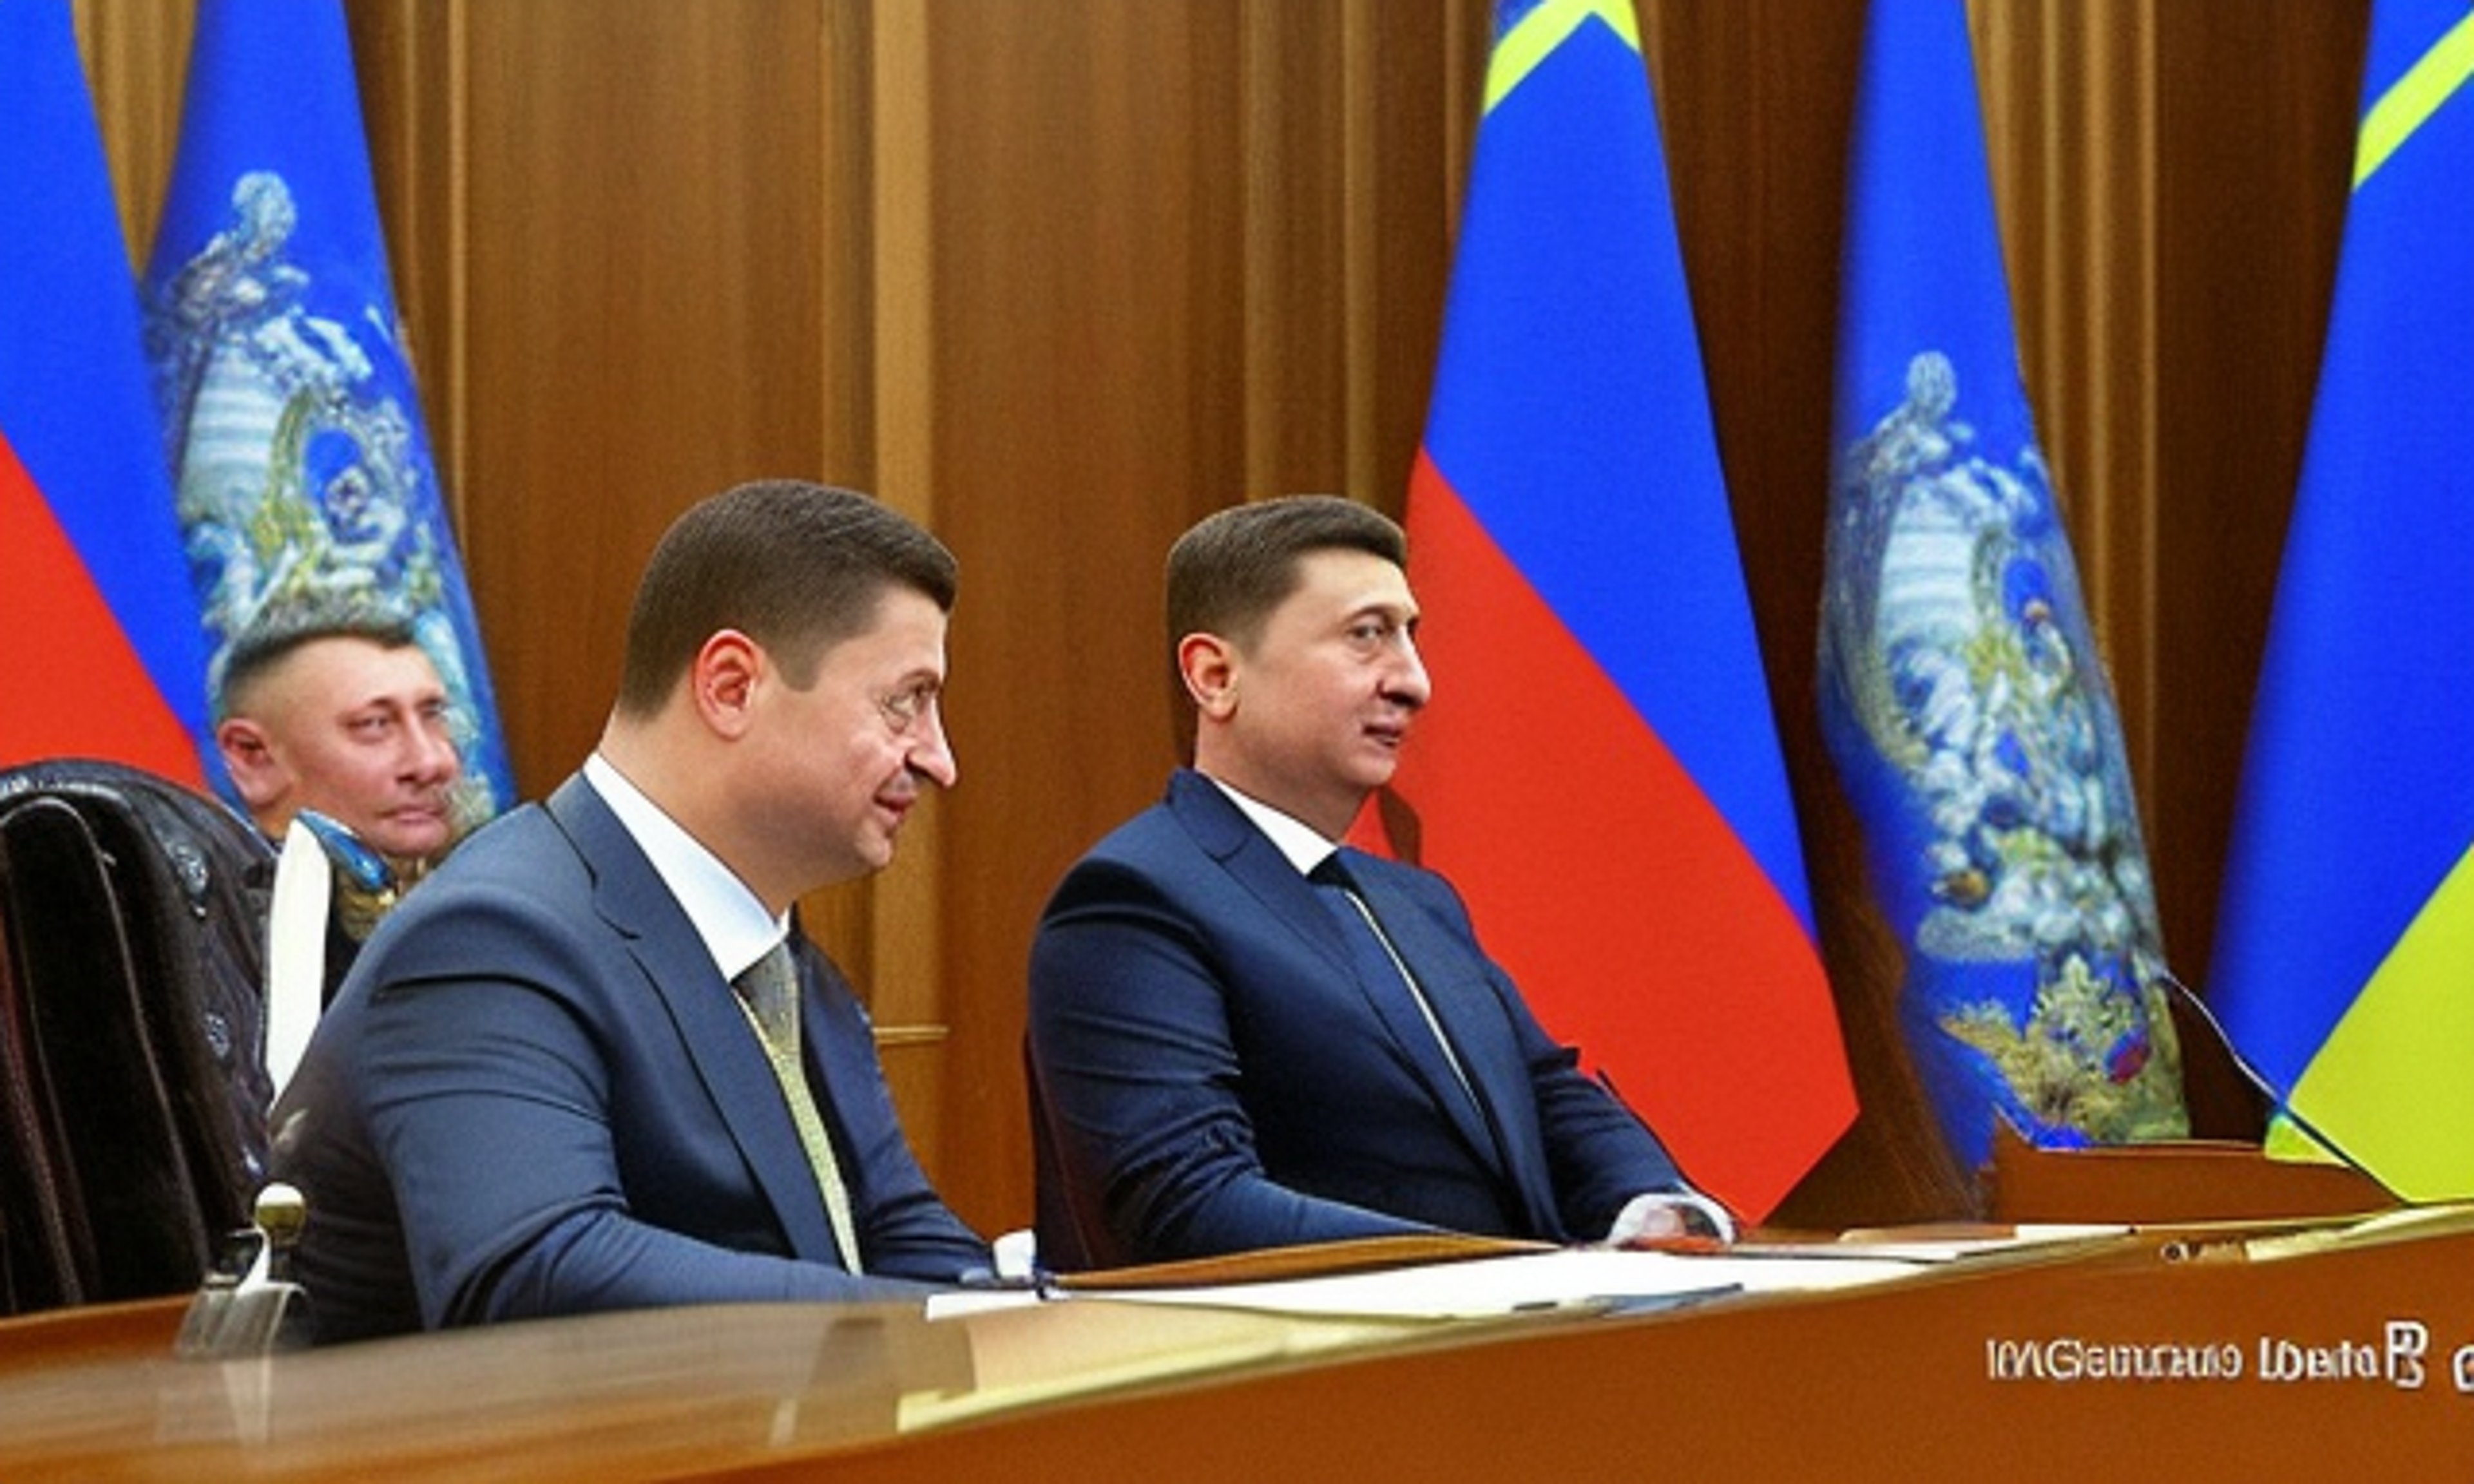 Leaked Documents Reveal Zelensky's Plans to Enrage Putin by Attacking Inside Russia